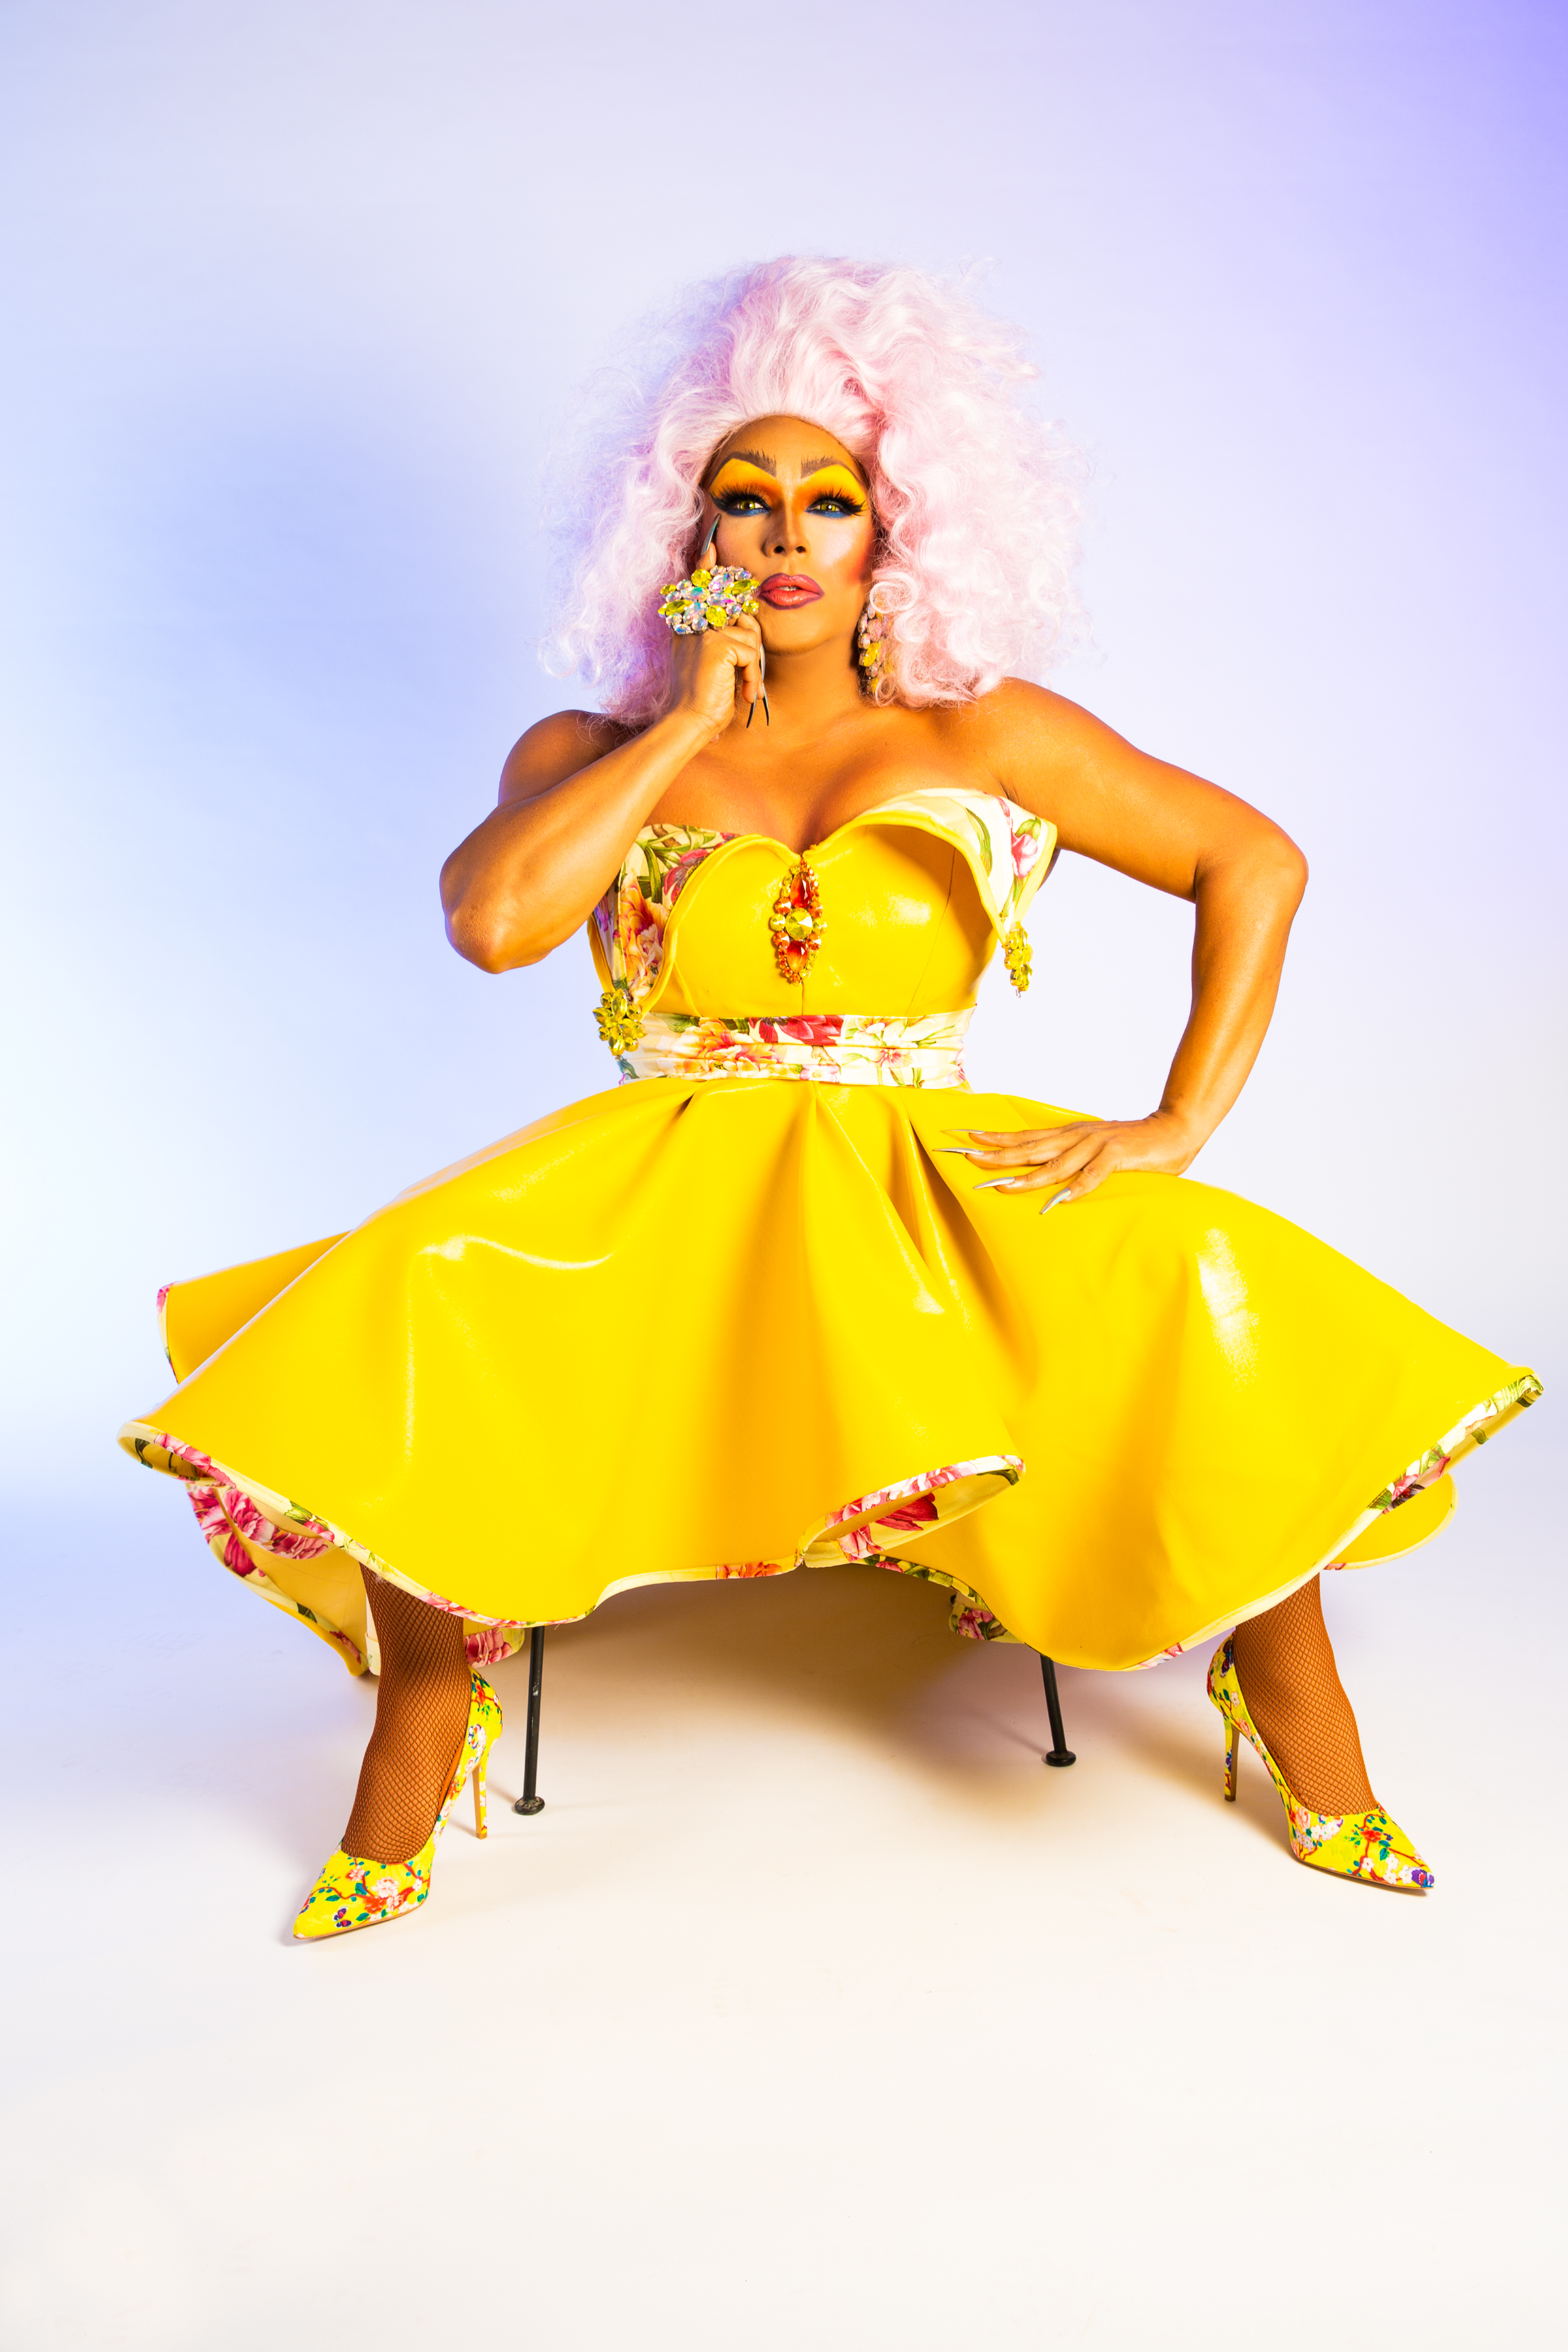 Samantha Vega in a yellow dress with a cotton candy pink wig.